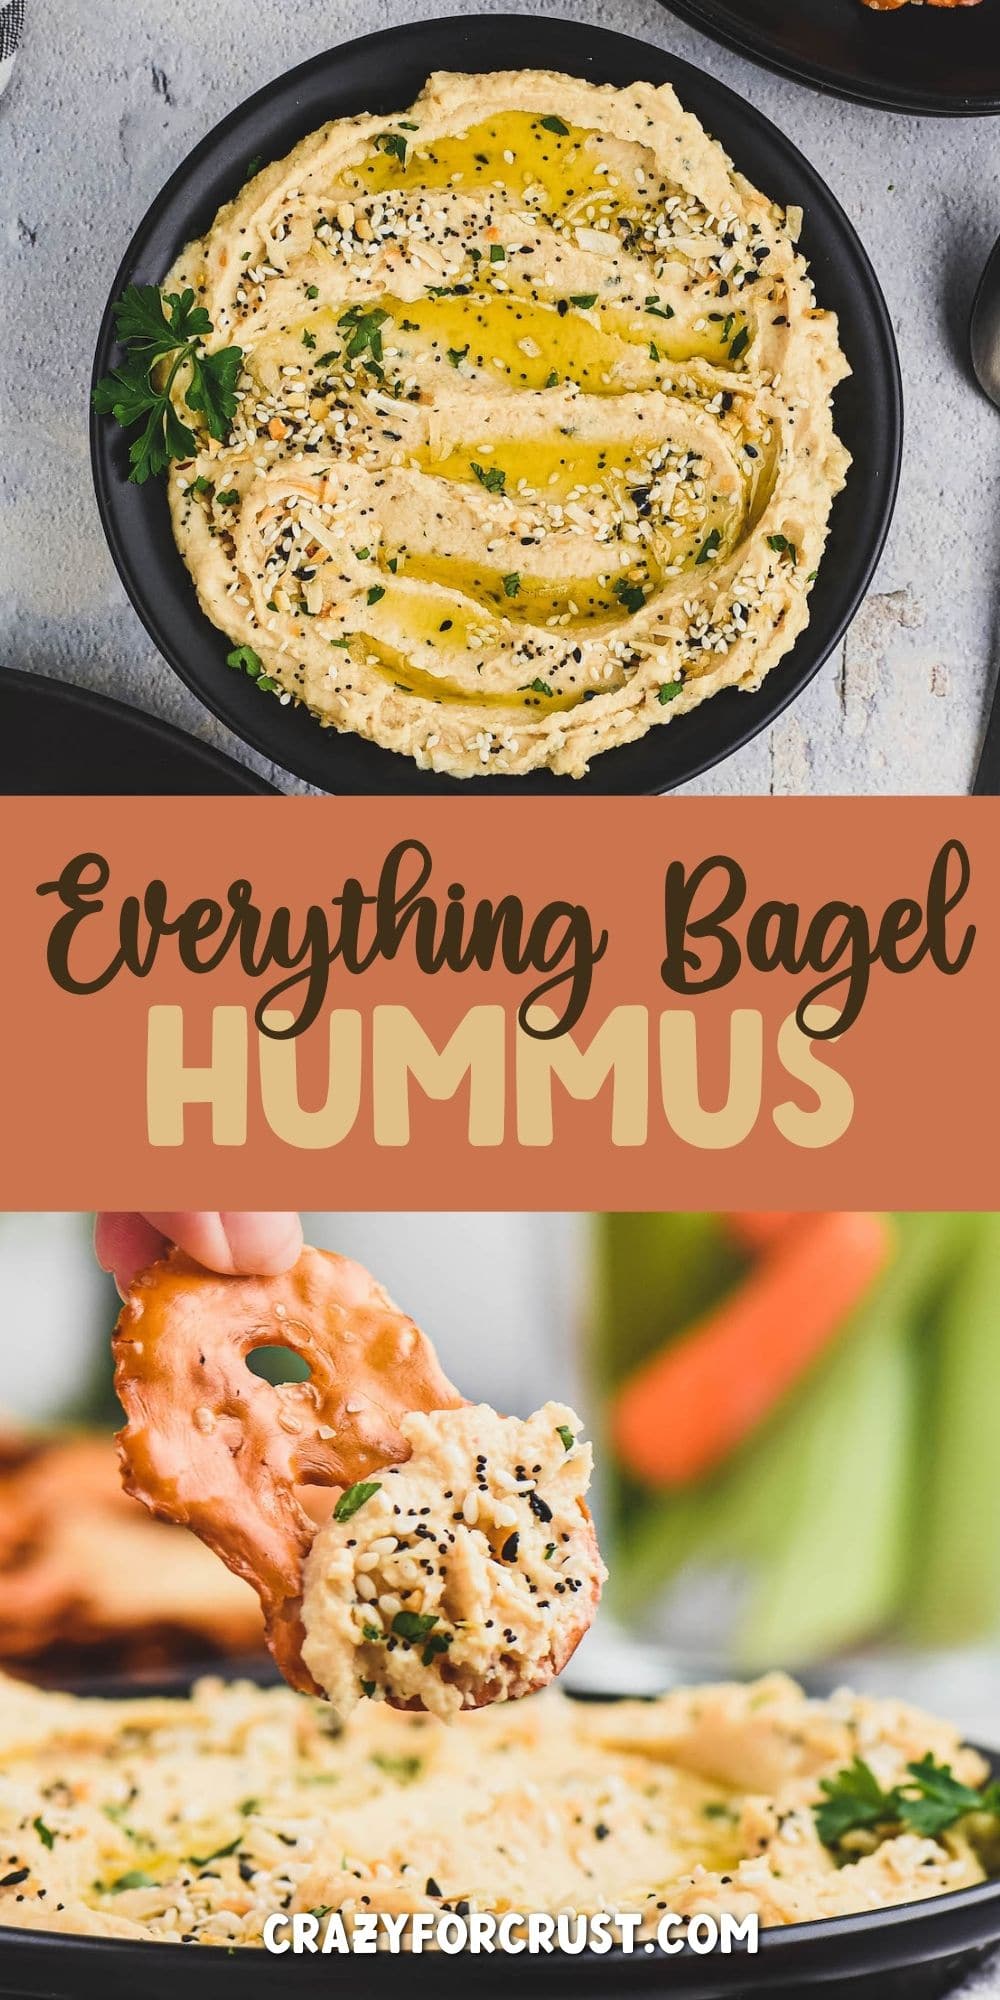 Everything hummus photo collage with recipe title in the middle of two photos